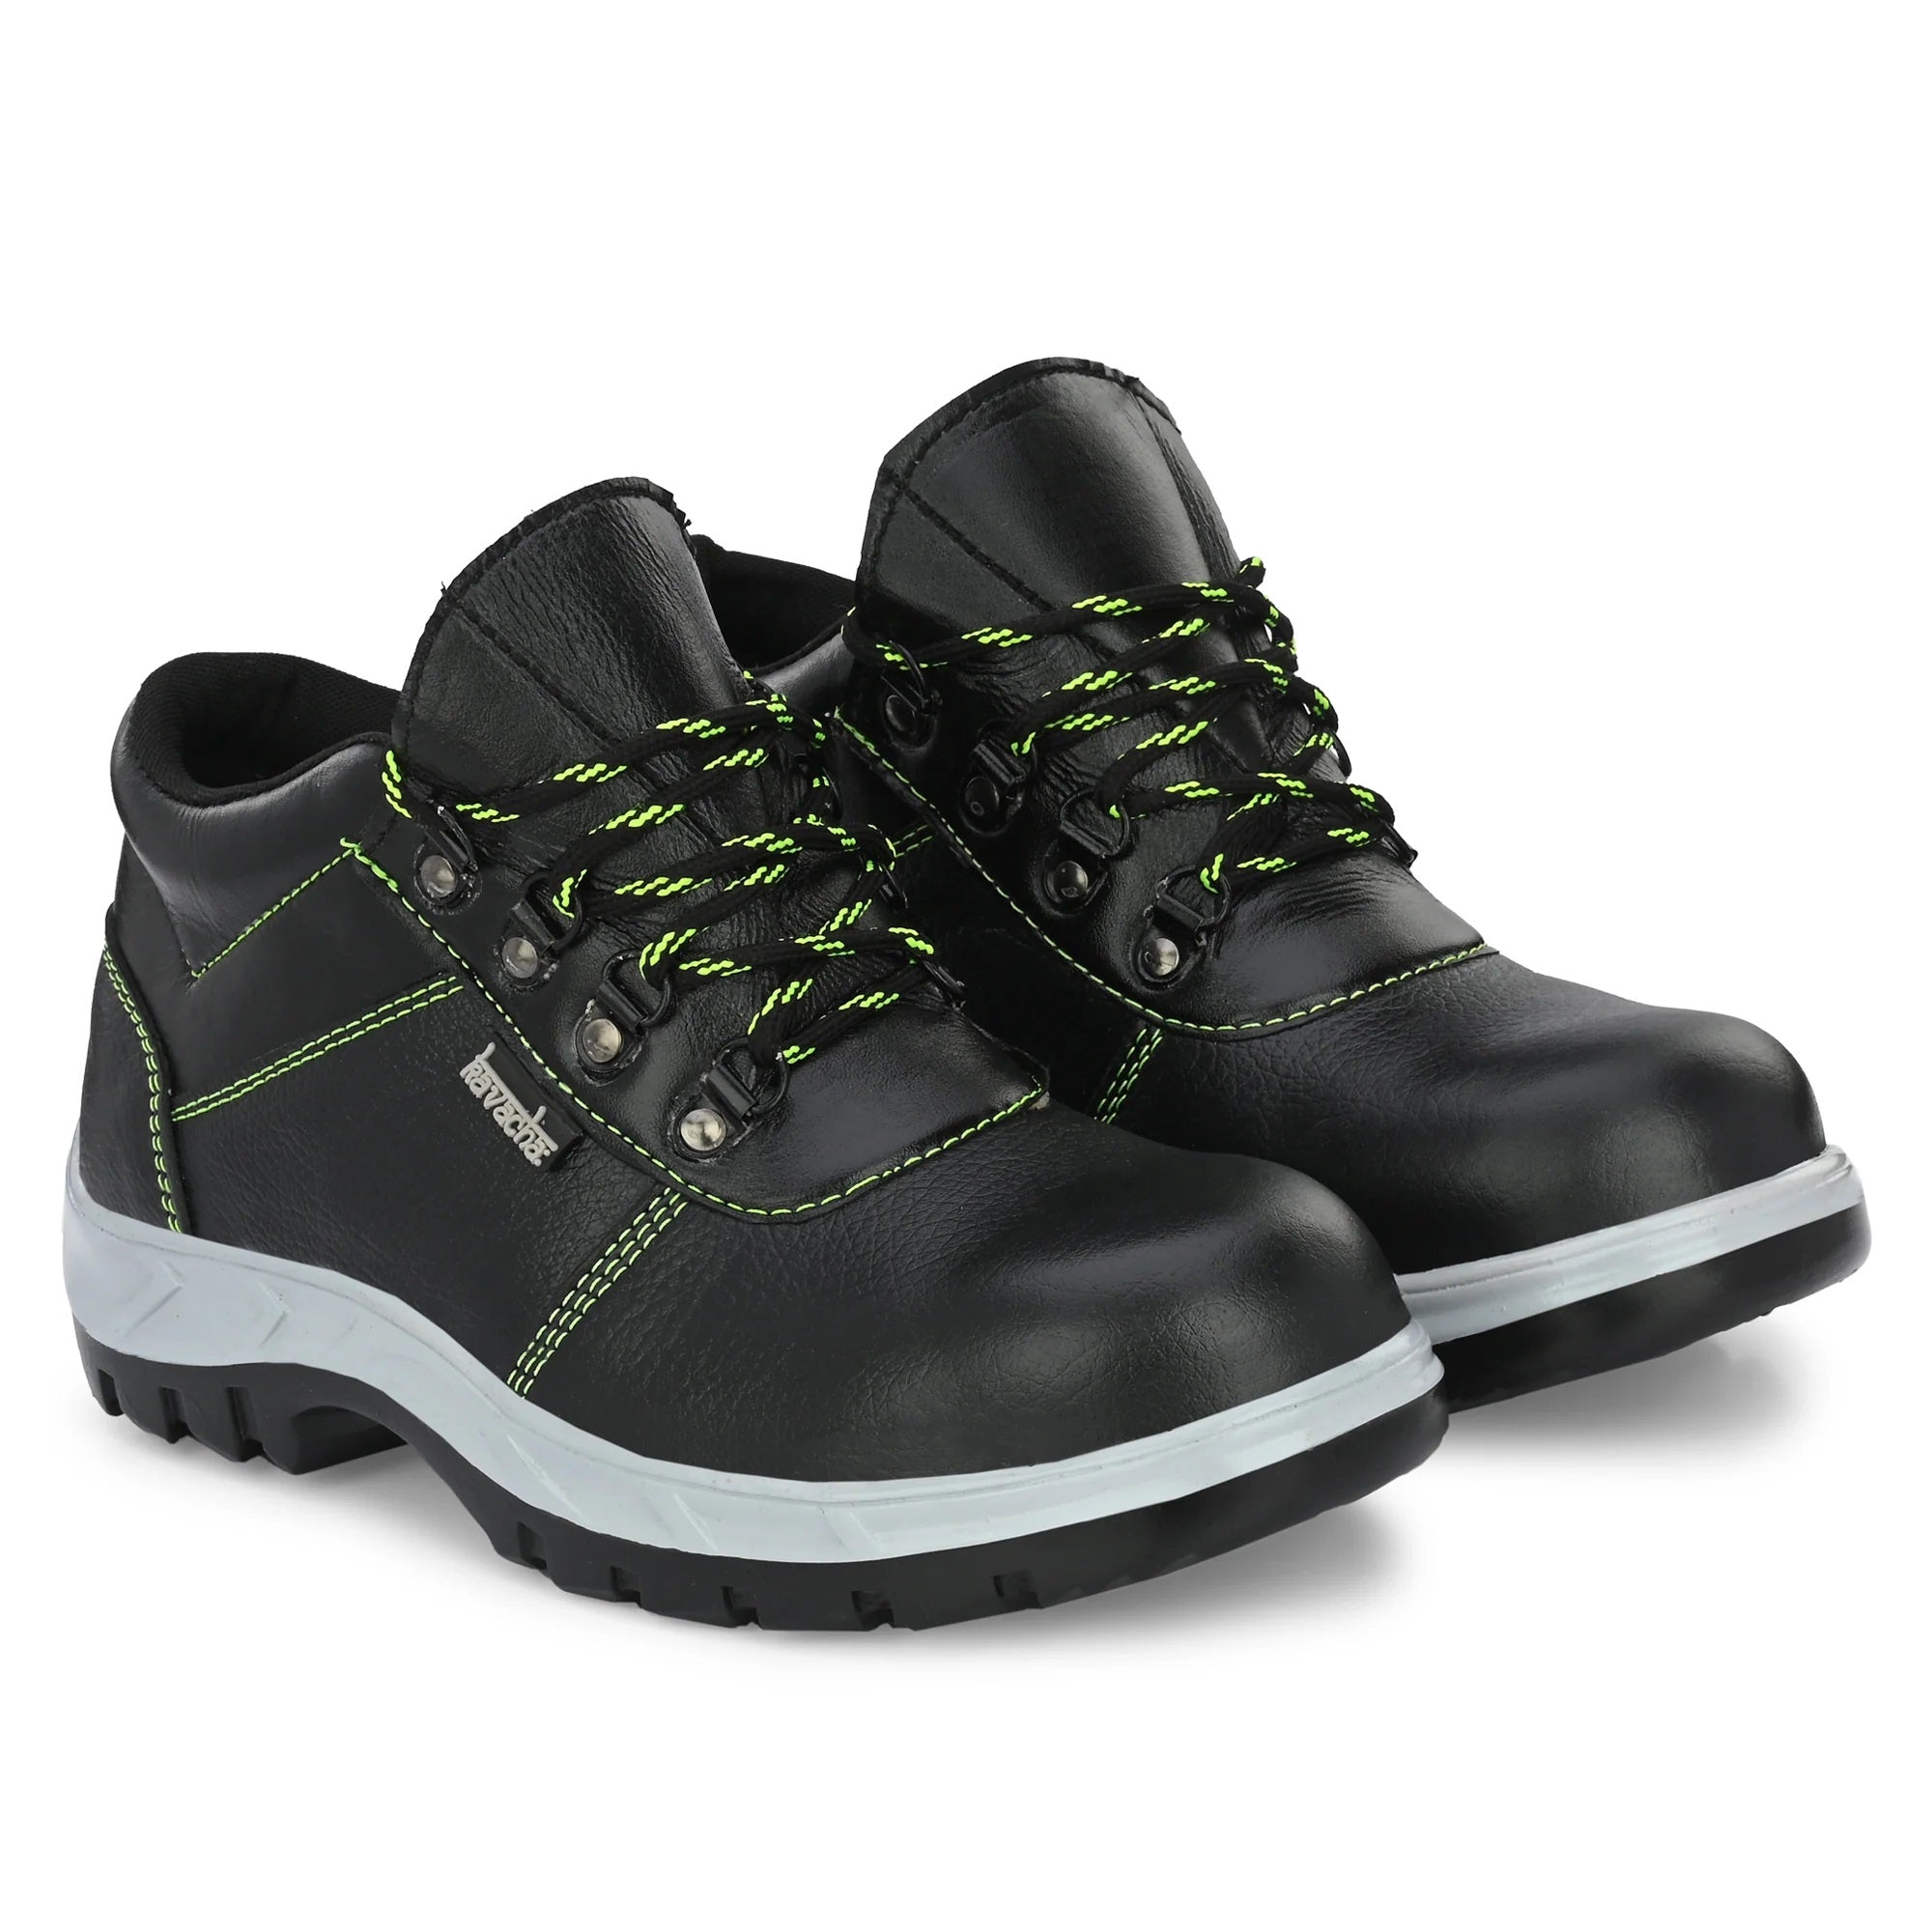 Kavacha Pure Leather Steel Toe Safety Shoe S131